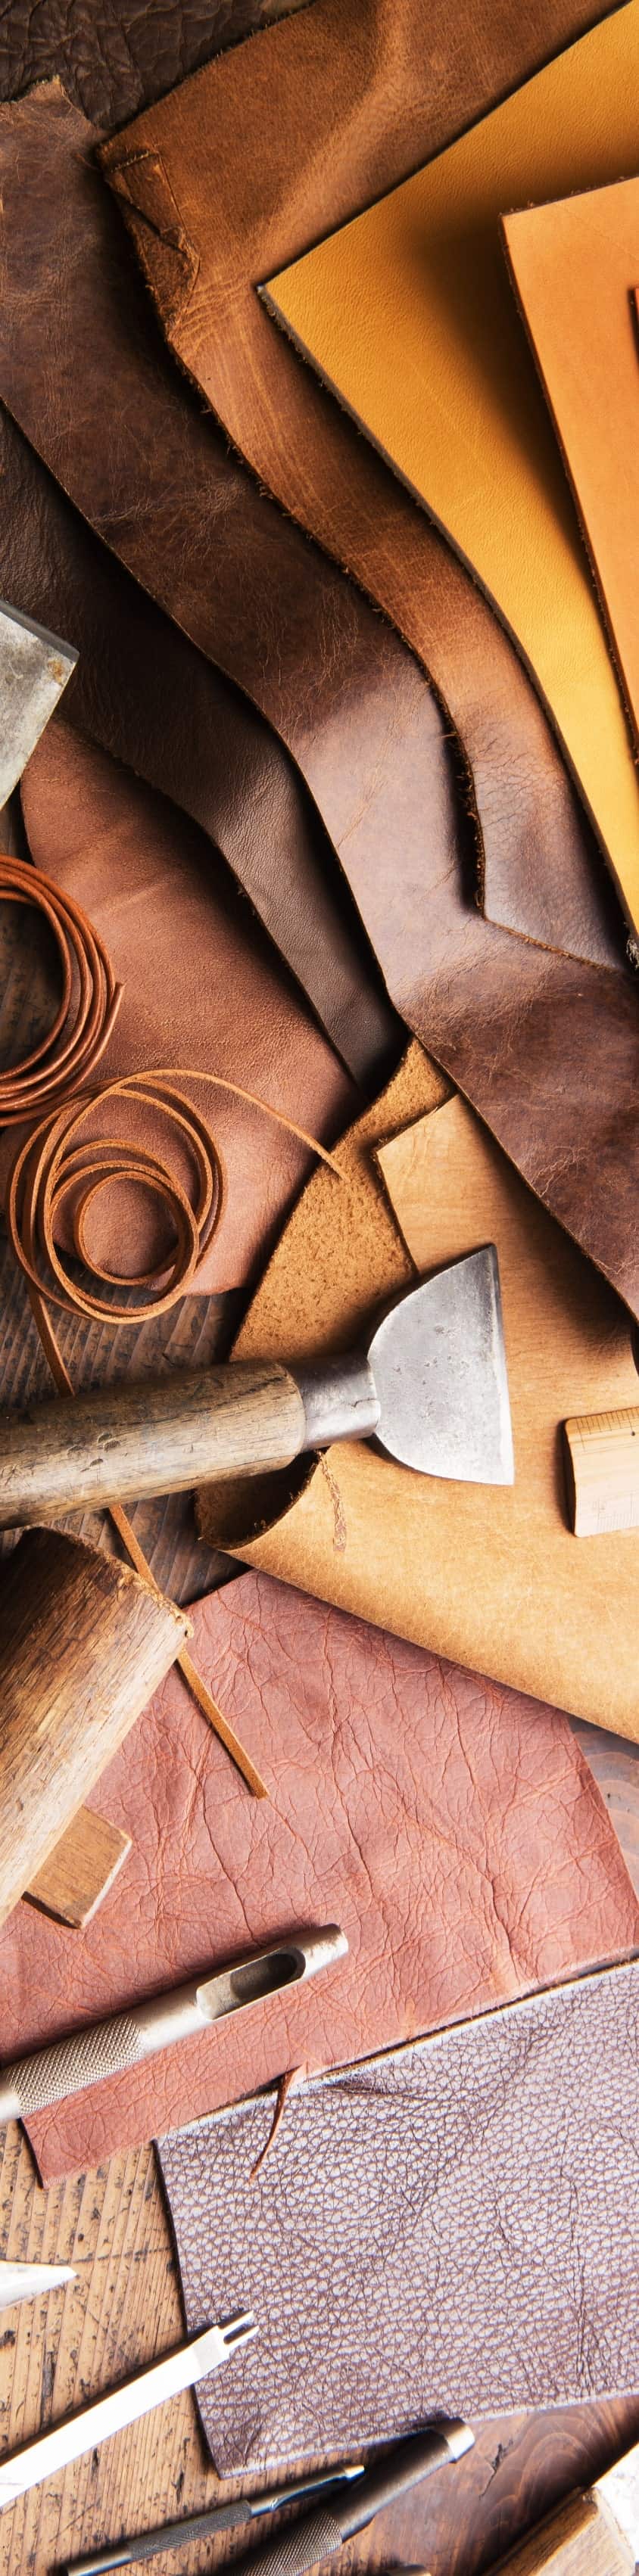 The image is an above shot of various leather materials and tools for leathermaking.